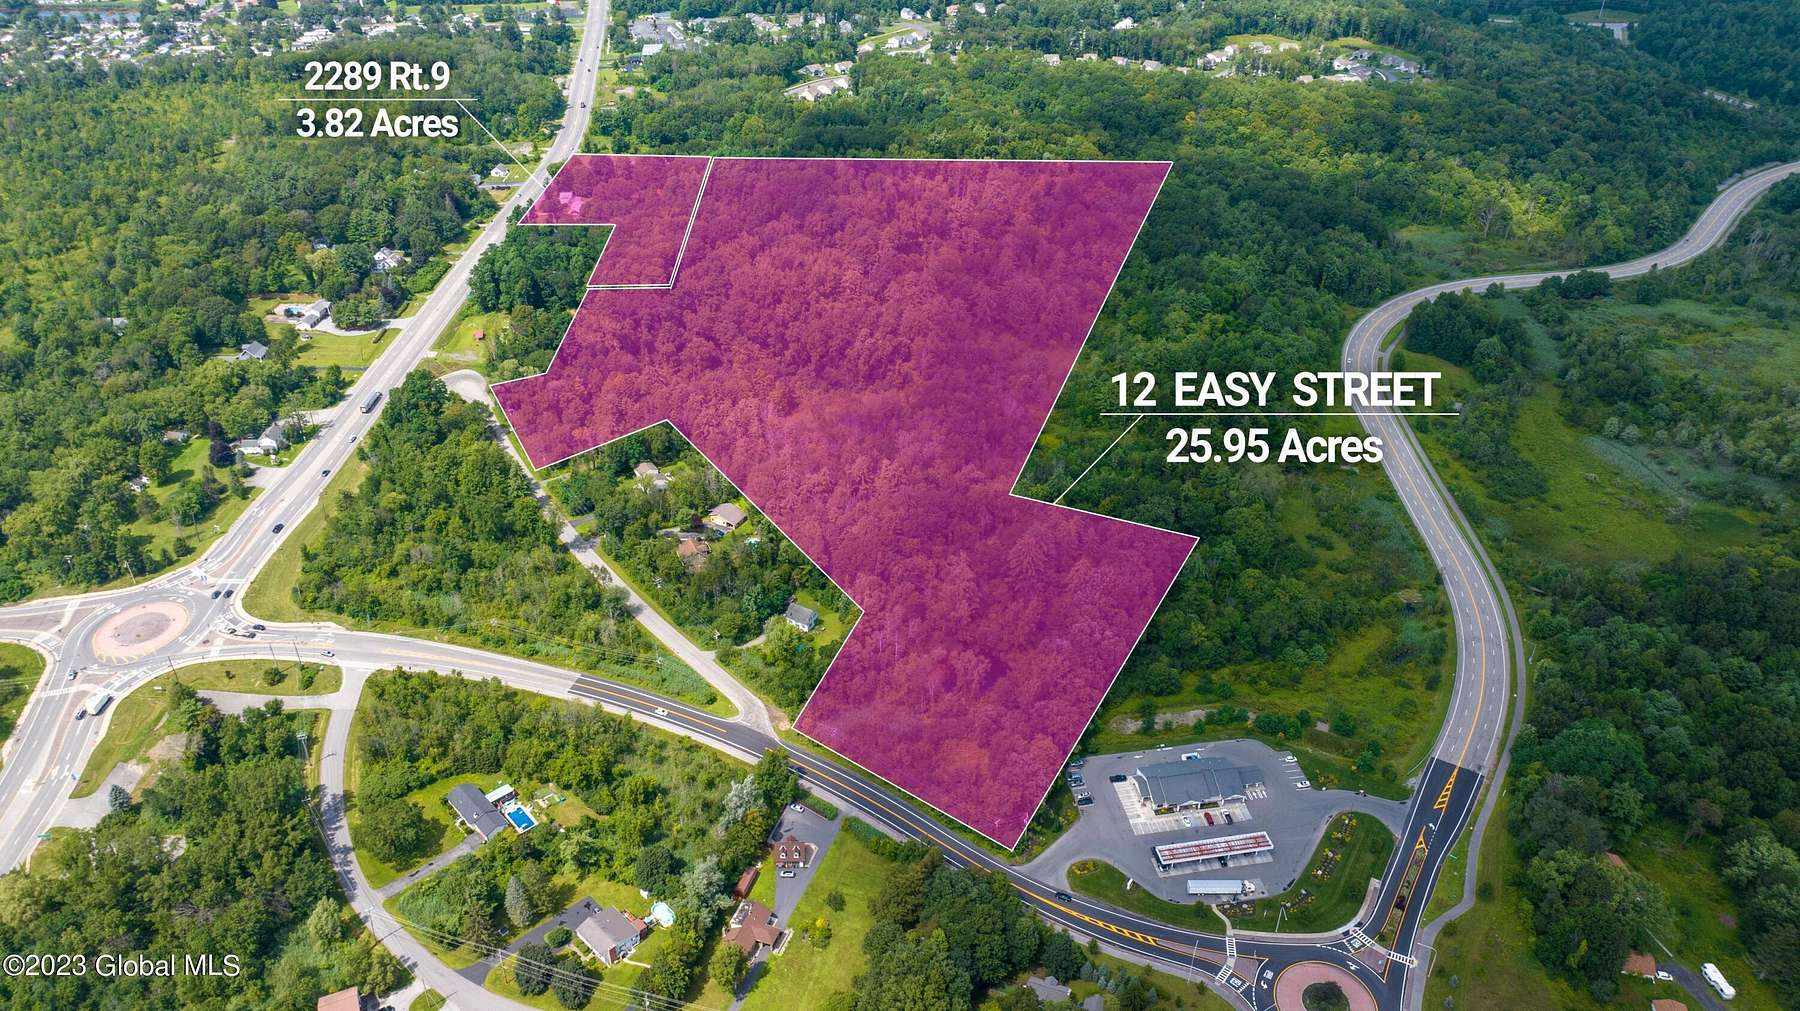 29.8 Acres of Commercial Land for Sale in Malta, New York